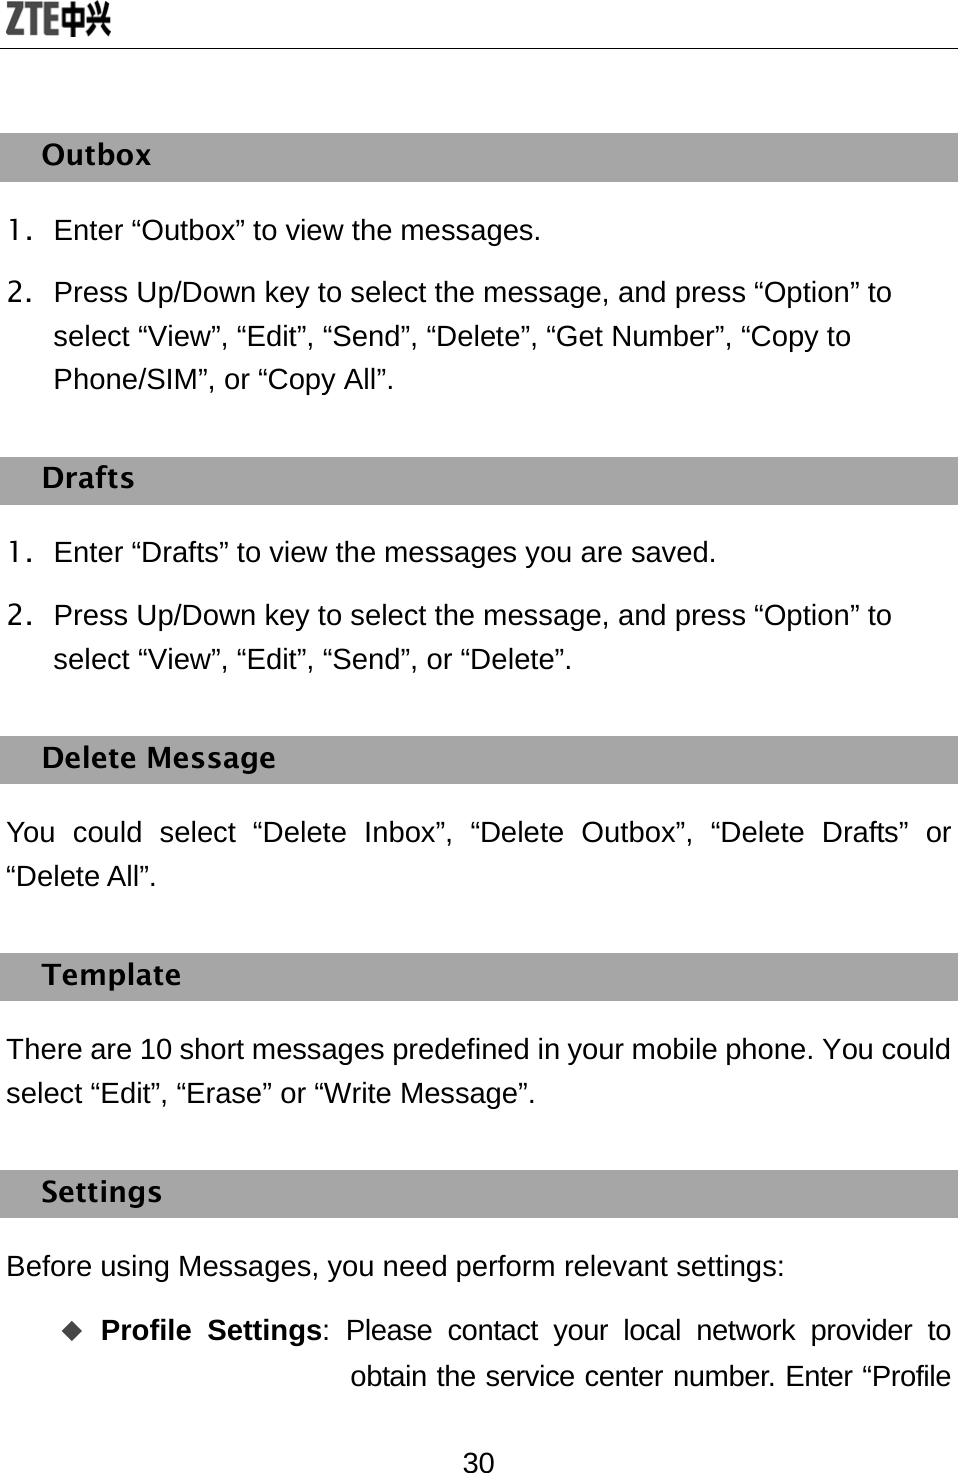  30 Outbox 1.  Enter “Outbox” to view the messages. 2.  Press Up/Down key to select the message, and press “Option” to select “View”, “Edit”, “Send”, “Delete”, “Get Number”, “Copy to Phone/SIM”, or “Copy All”. Drafts 1.  Enter “Drafts” to view the messages you are saved. 2.  Press Up/Down key to select the message, and press “Option” to select “View”, “Edit”, “Send”, or “Delete”. Delete Message You could select “Delete Inbox”, “Delete Outbox”, “Delete Drafts” or “Delete All”. Template There are 10 short messages predefined in your mobile phone. You could select “Edit”, “Erase” or “Write Message”.   Settings Before using Messages, you need perform relevant settings:  Profile Settings: Please contact your local network provider to obtain the service center number. Enter “Profile 